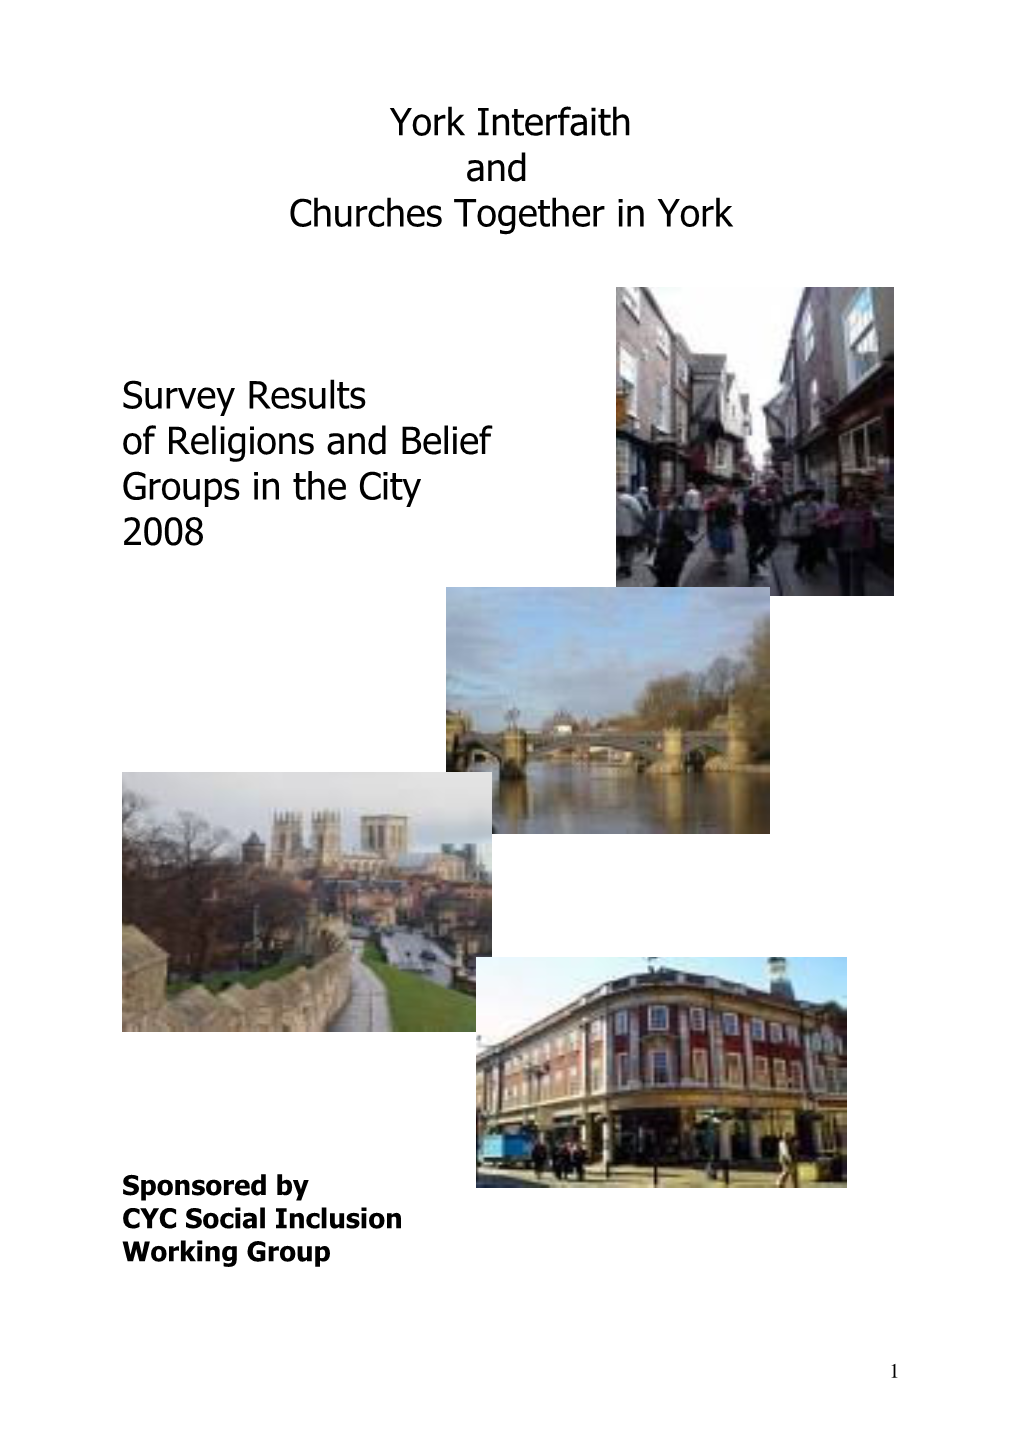 York Interfaith and Churches Together in York Survey Results of Religions